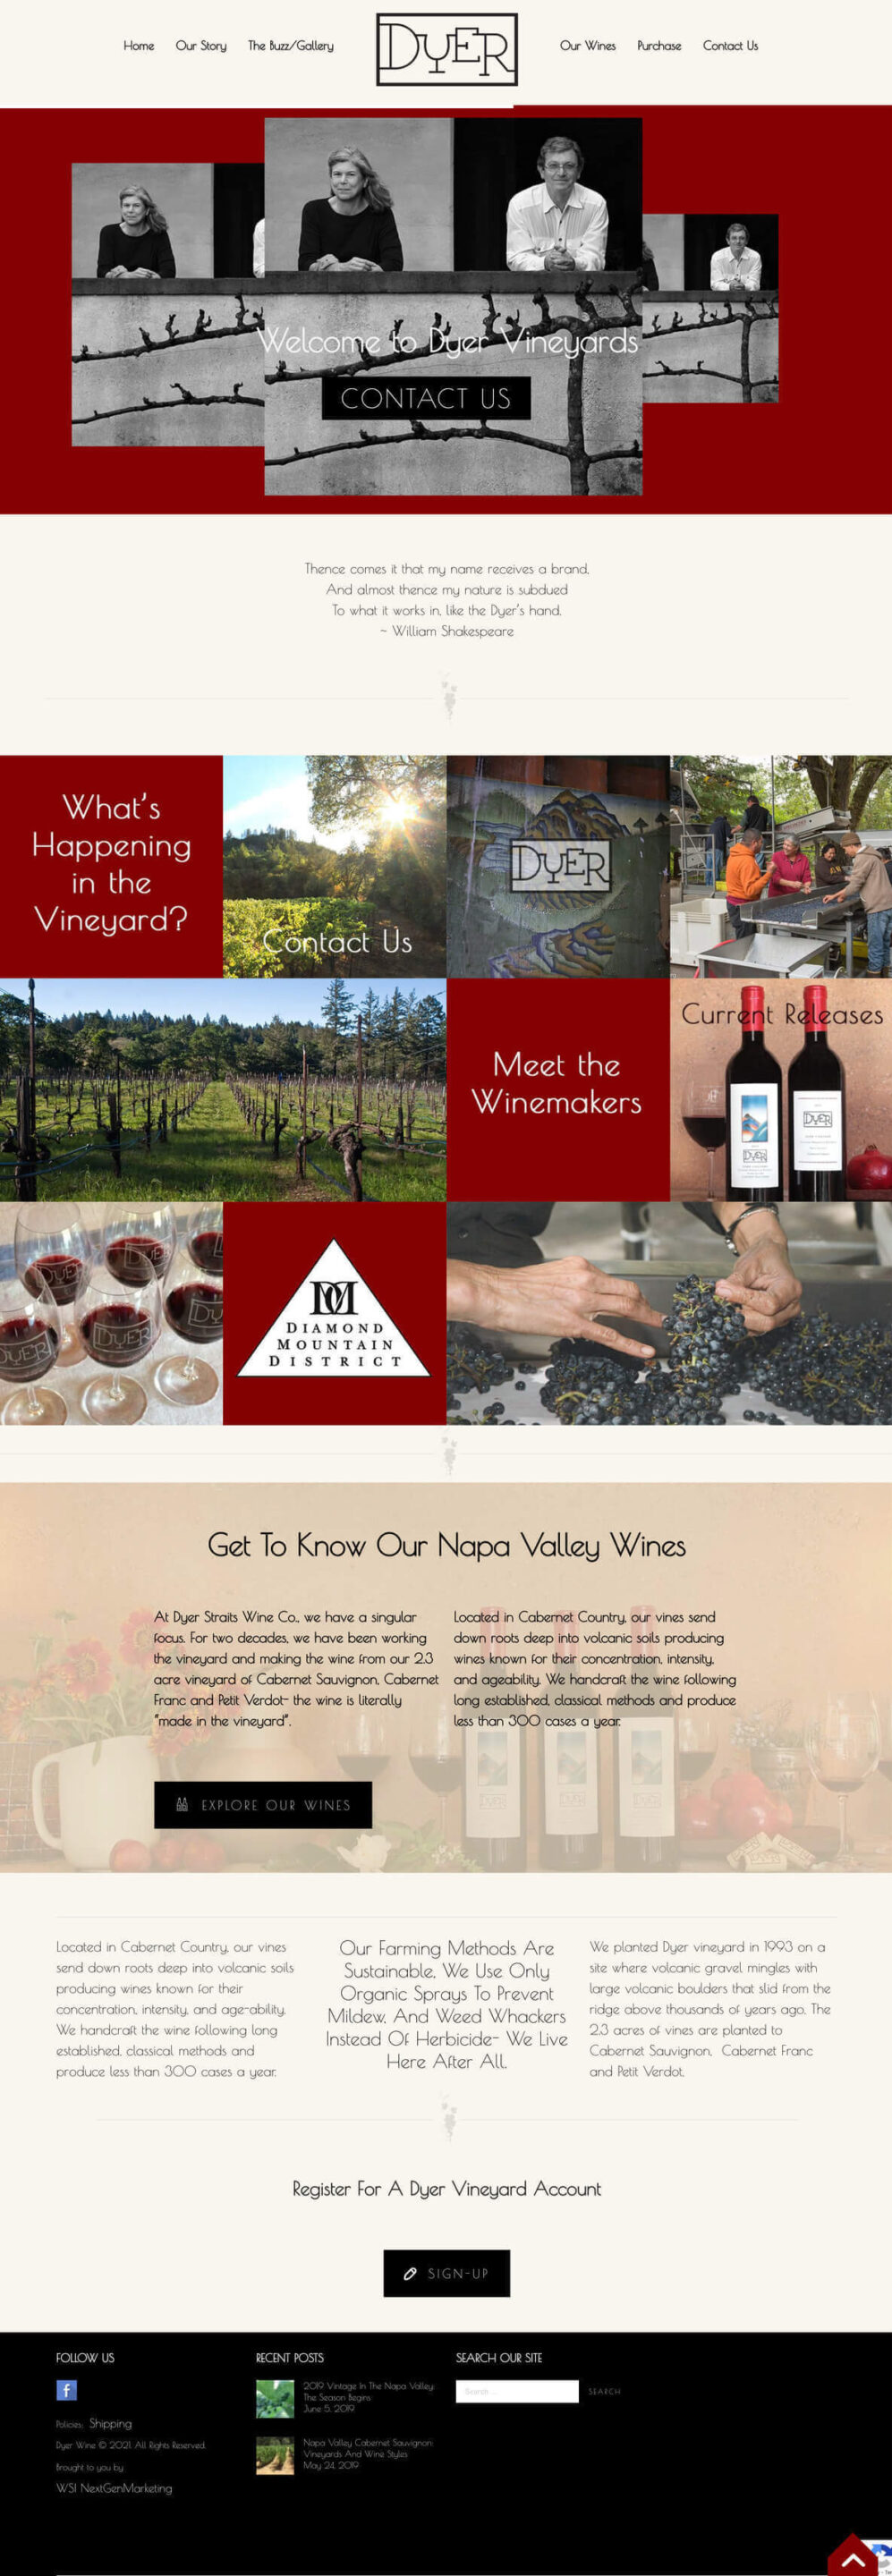 dyer-winery-web-design-homepage-1